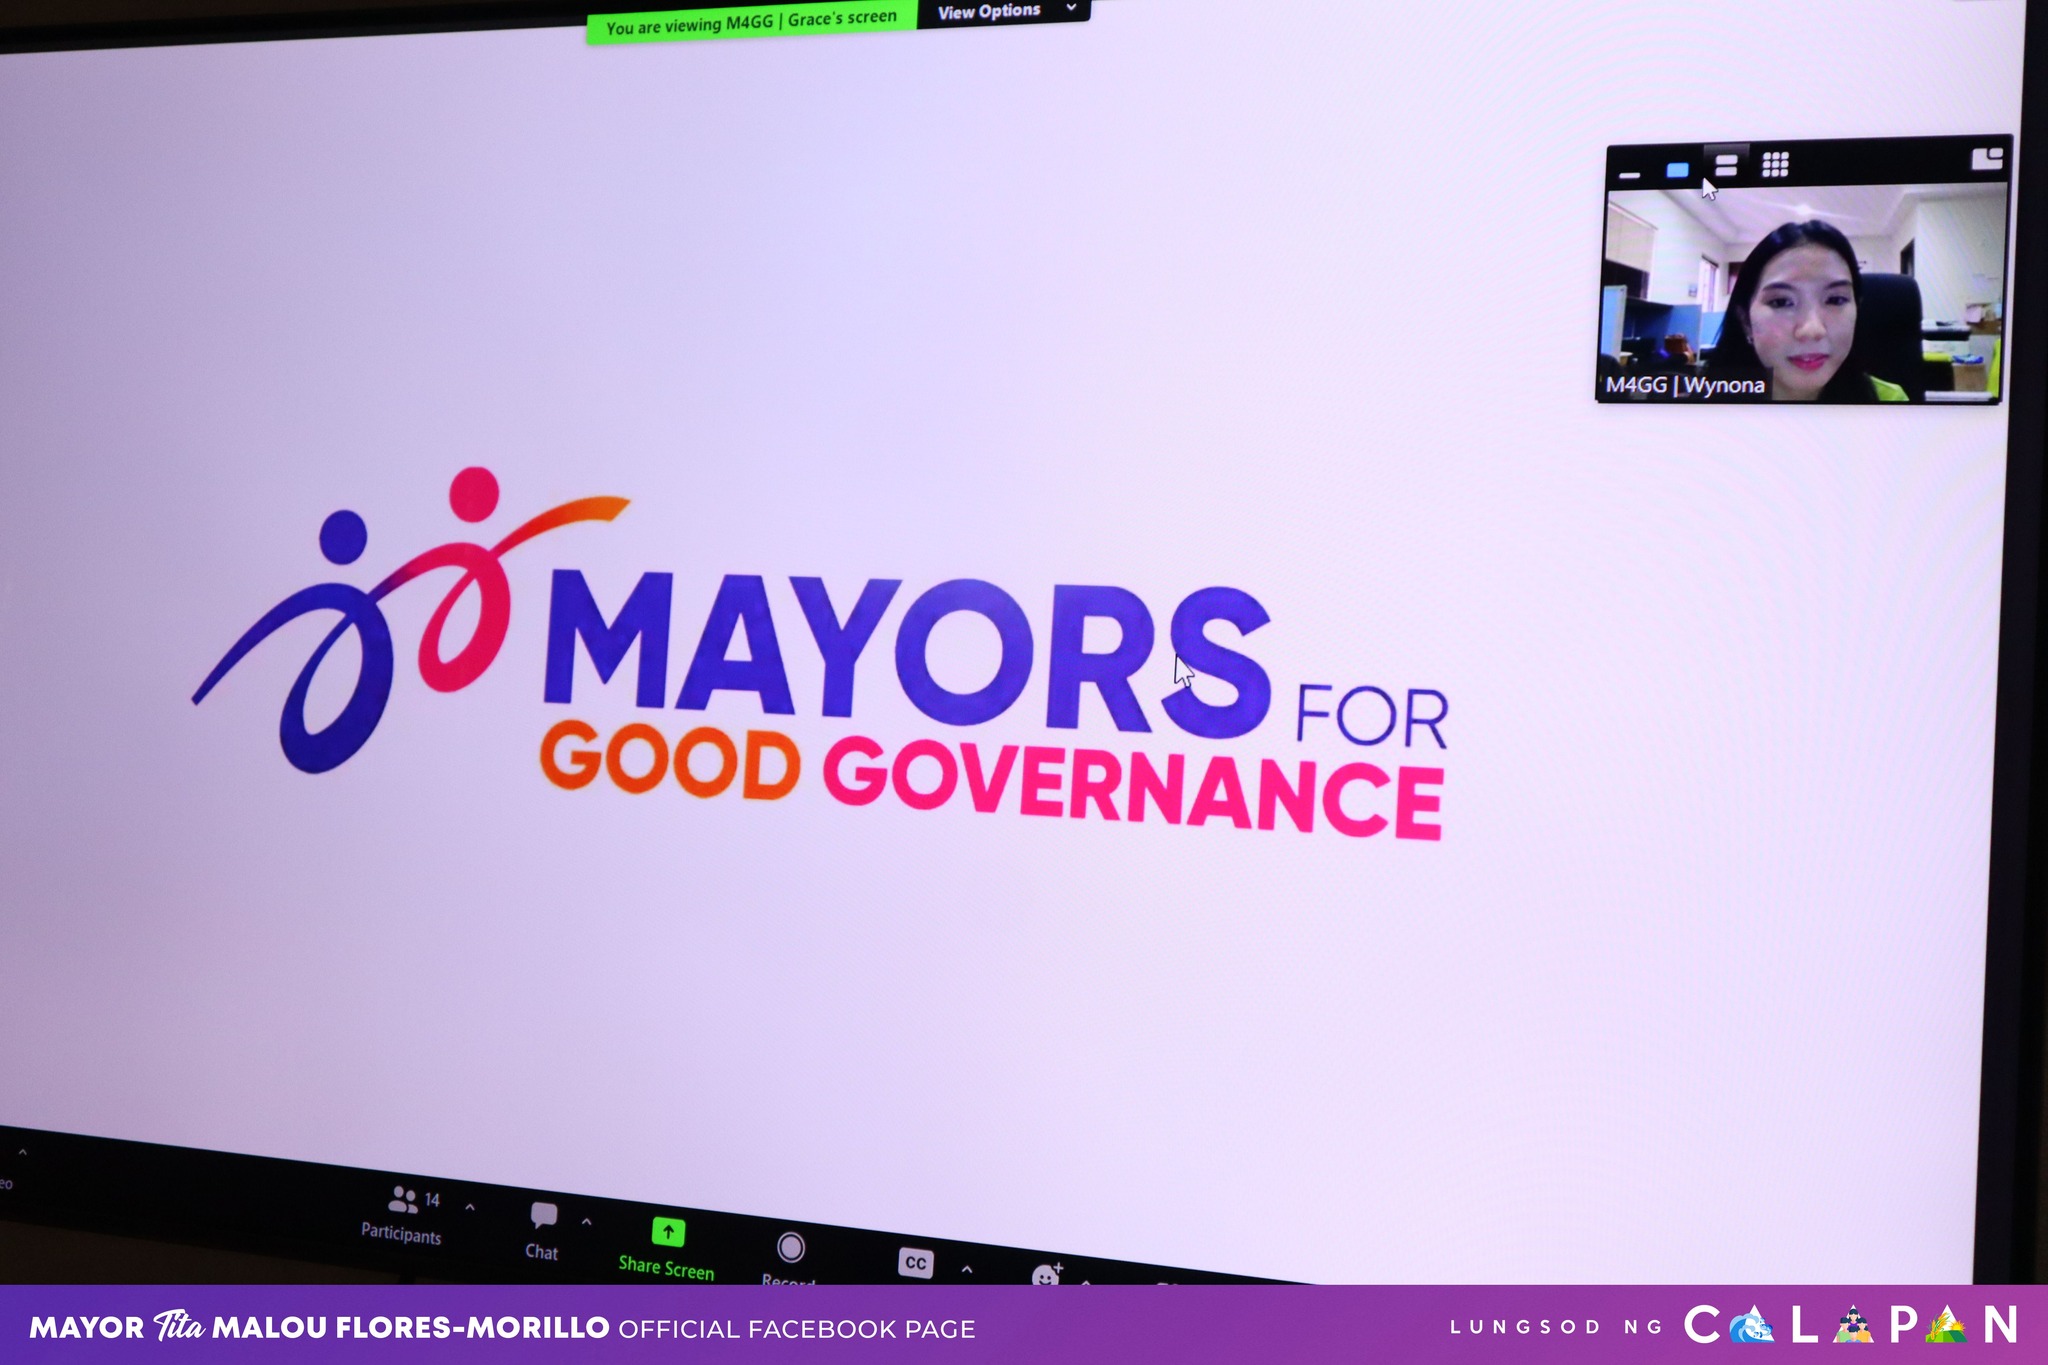 Mayors for good governance virtual discussion